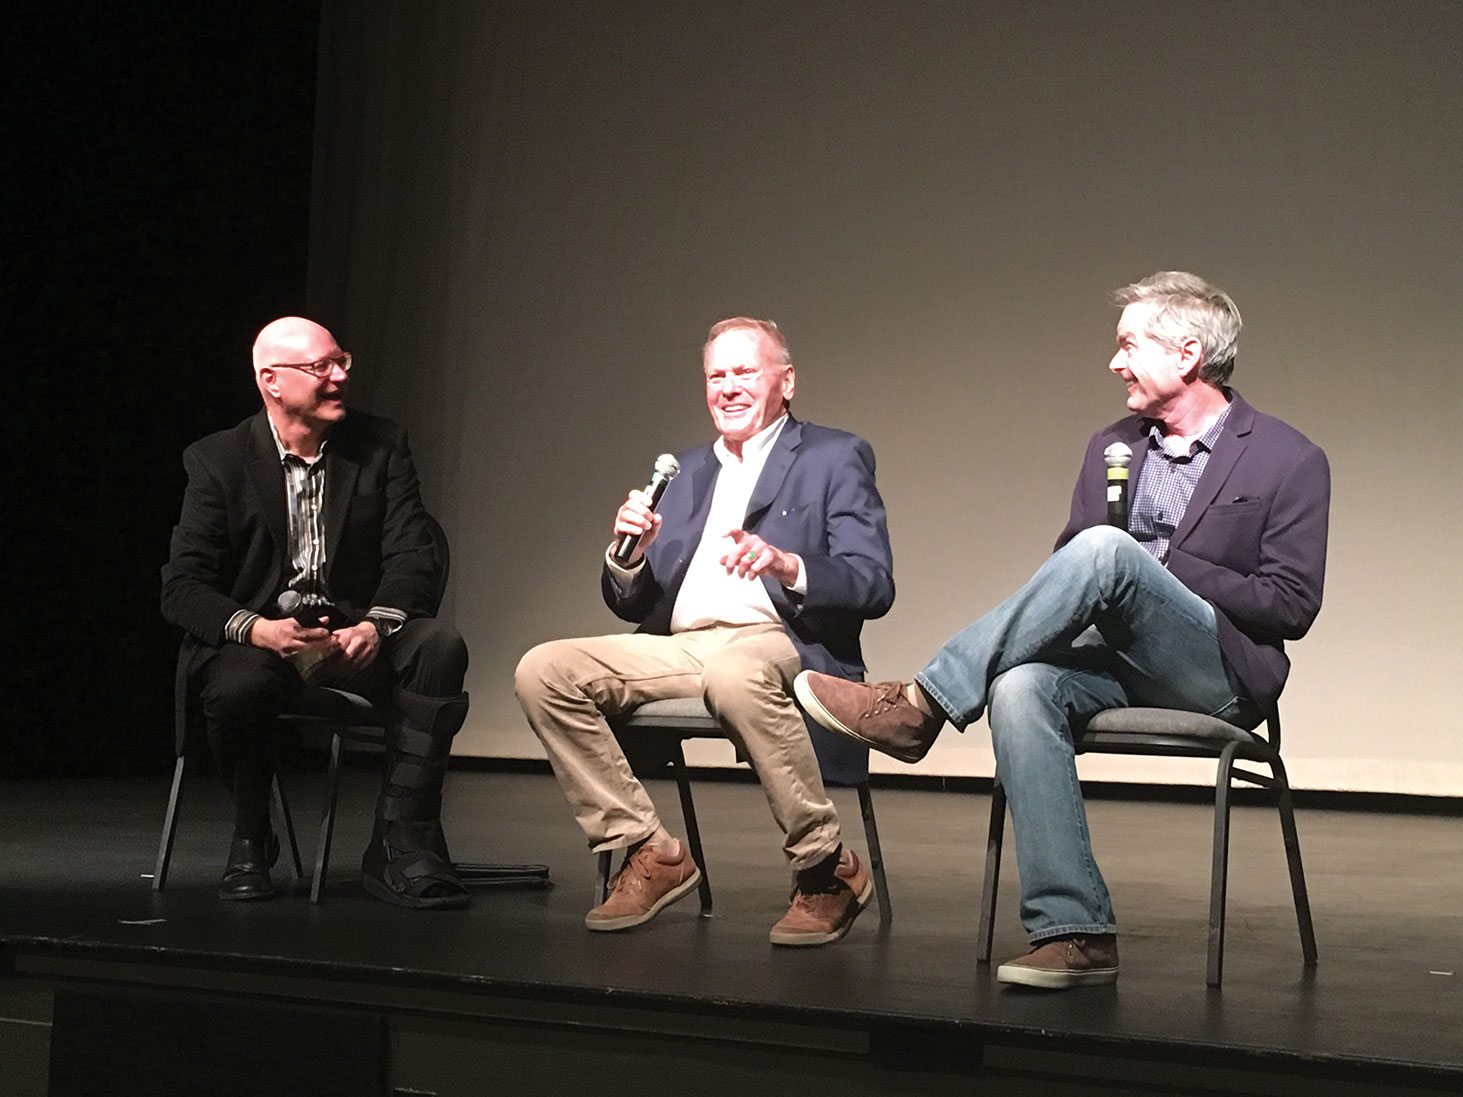 Andy Friedenberg, director of the PebbleCreek Cinema Society, Tab Hunter and Allan Glaser, producer of the documentary